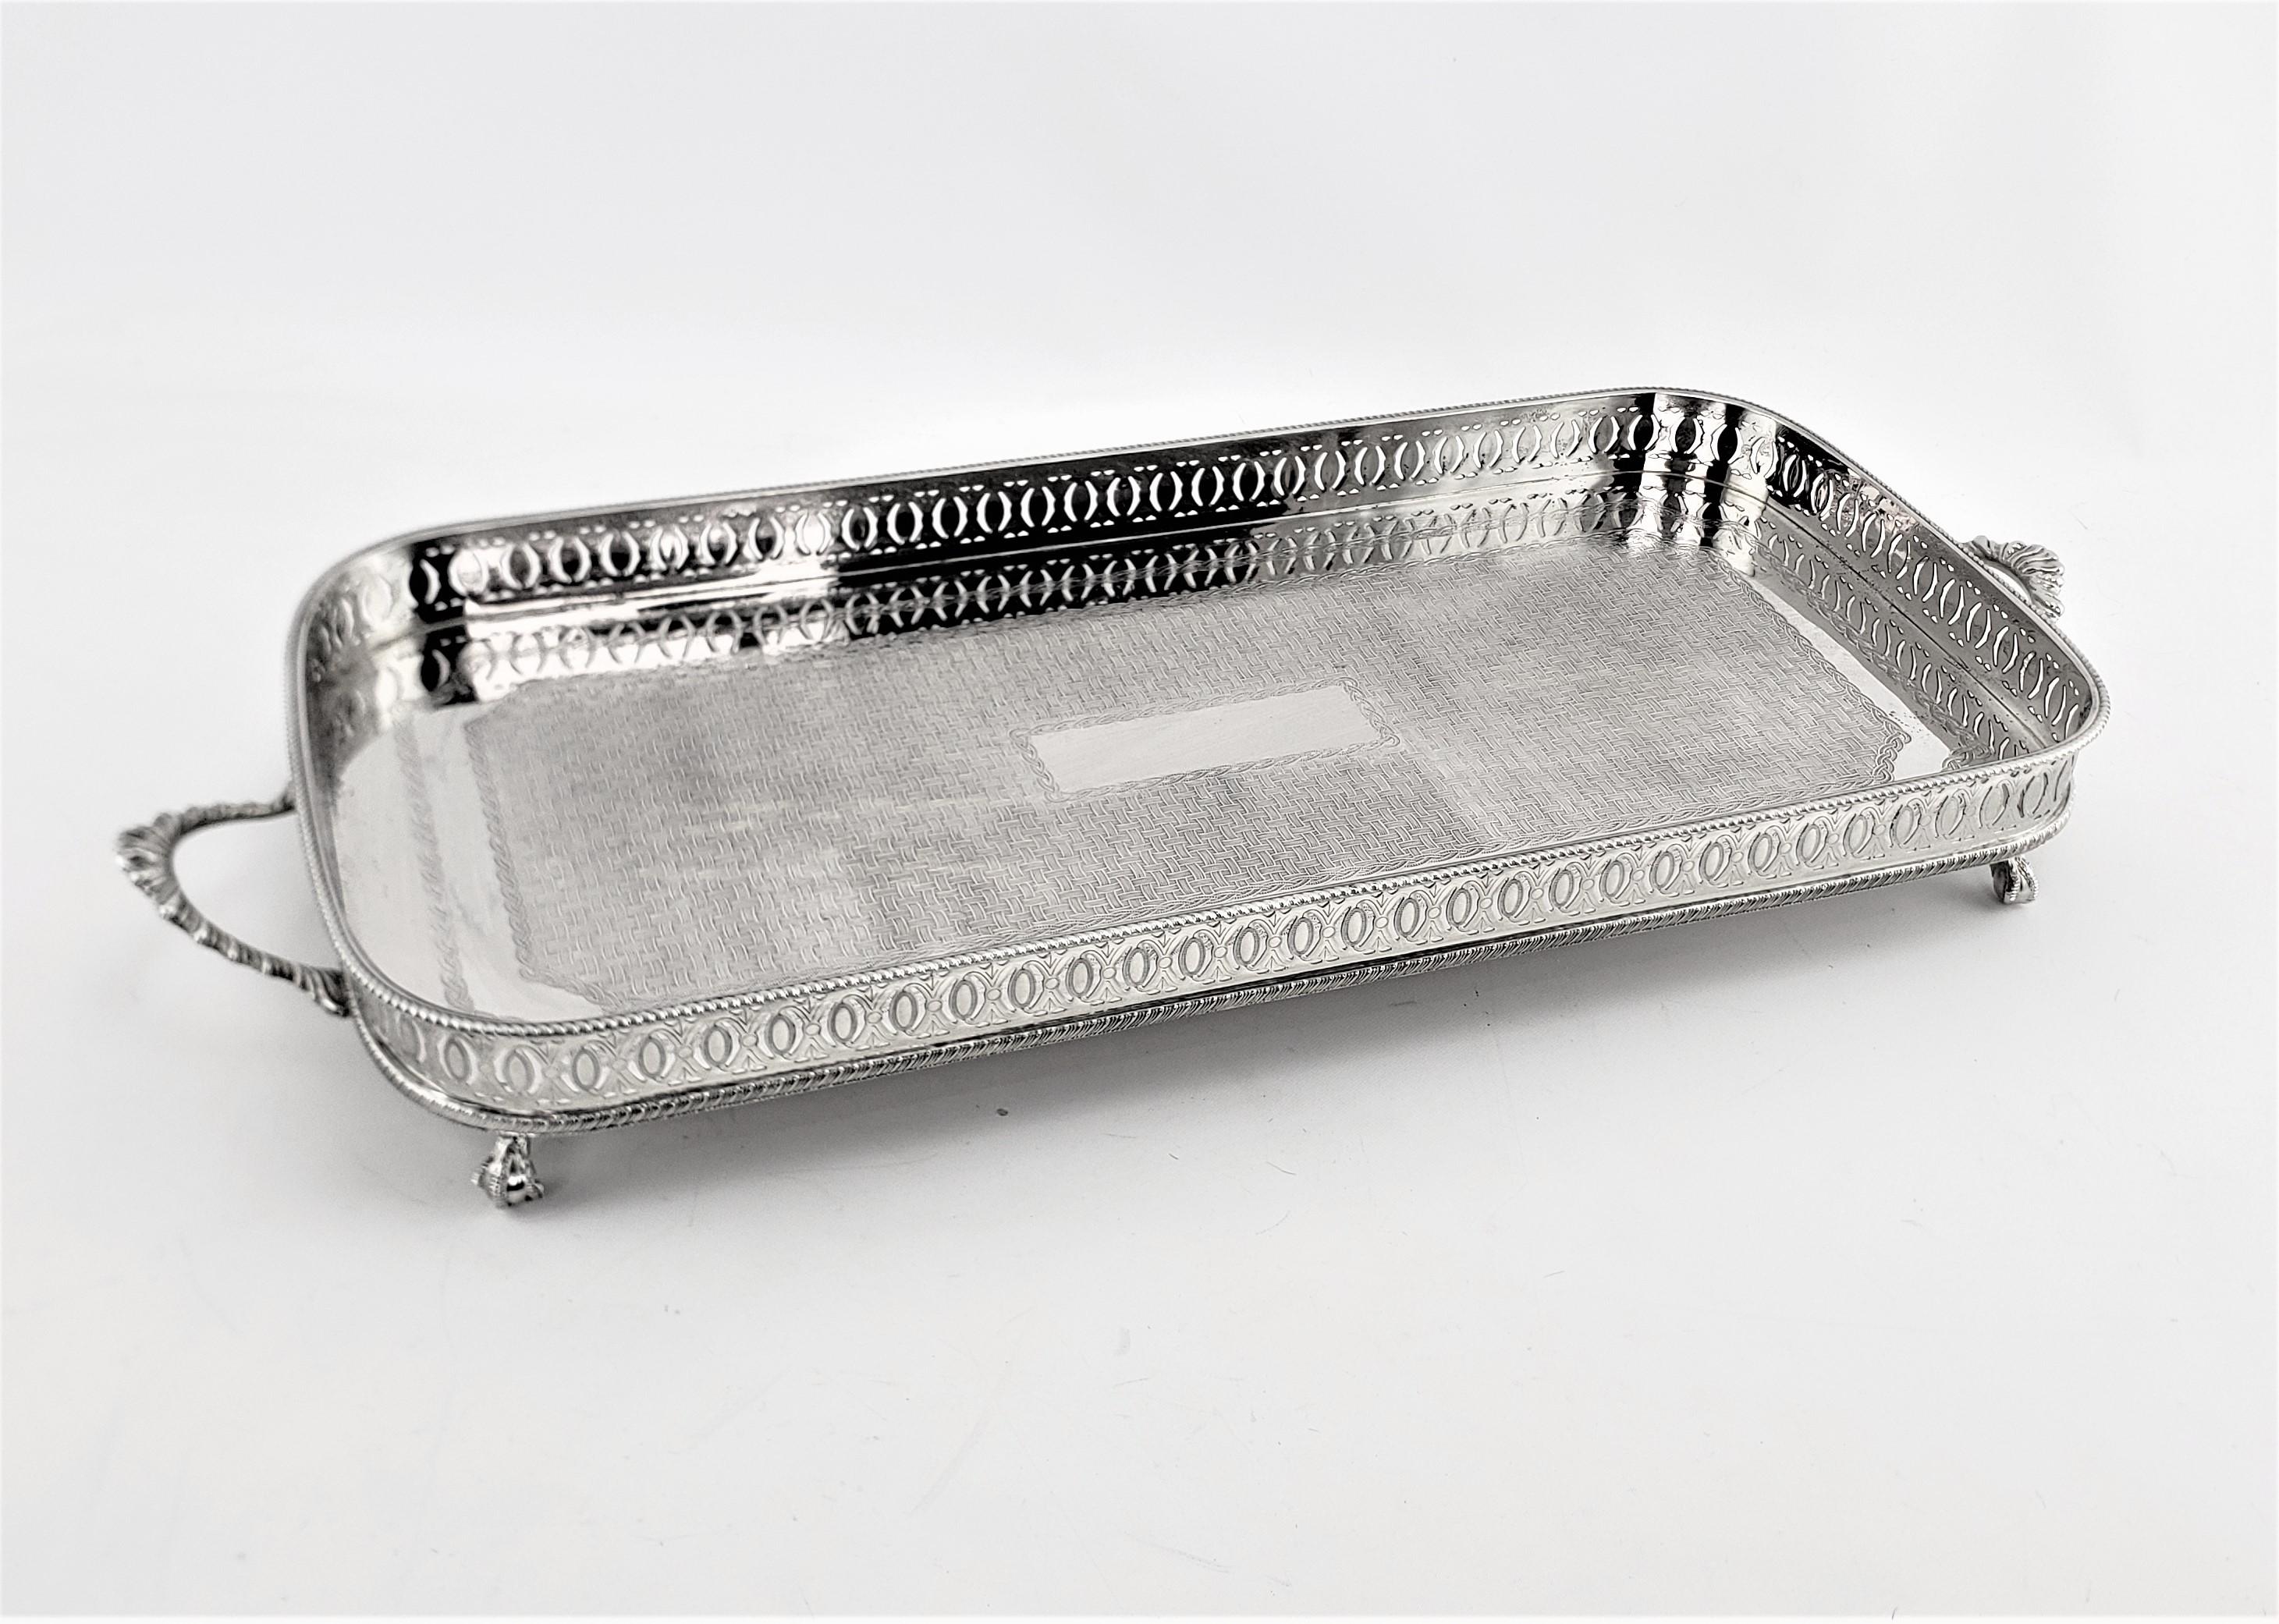 This rectangular silver plated gallery serving tray shows no maker's mark, but originated from England and dating to approximately 1920 and done in an Edwardian style. The tray has a nicely pierced gallery, which is accented by the beaded top edge